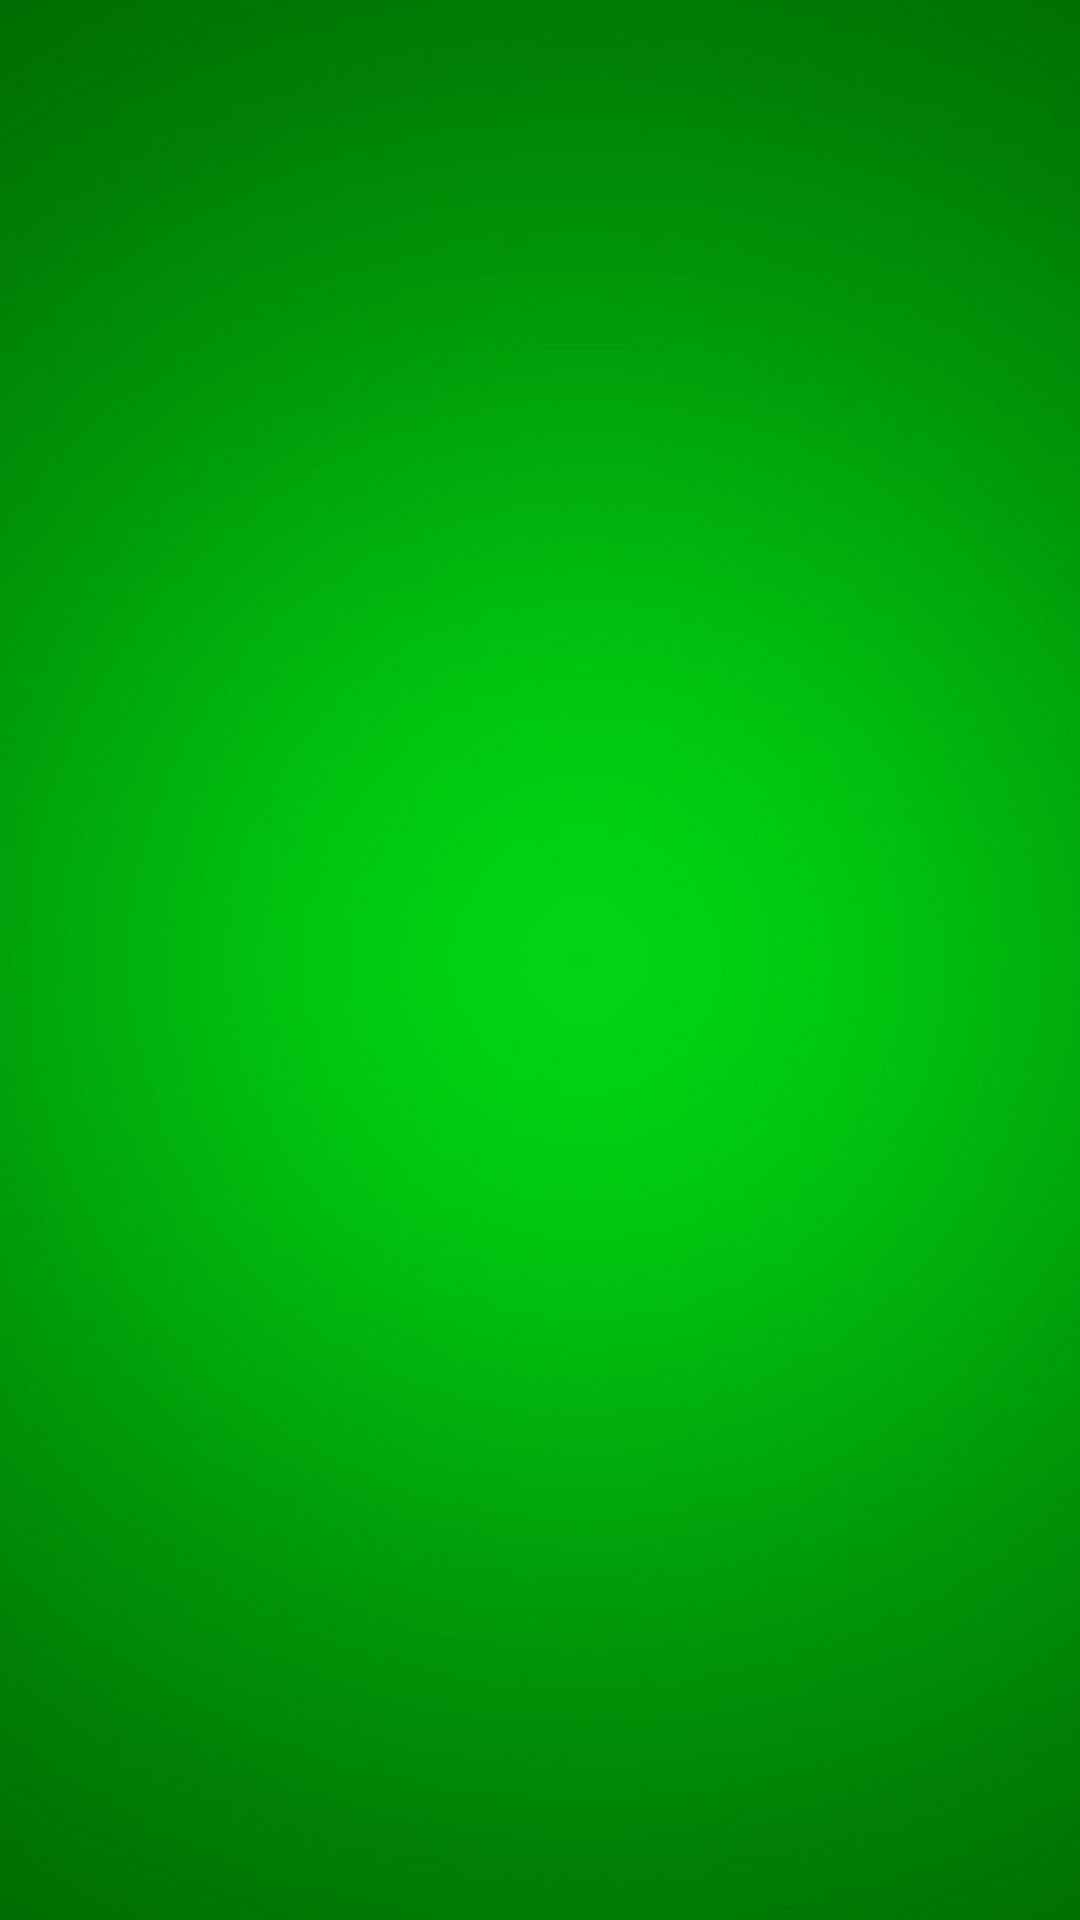 Green Android Wallpaper with resolution 1080X1920 pixel. You can make this wallpaper for your Android backgrounds, Tablet, Smartphones Screensavers and Mobile Phone Lock Screen